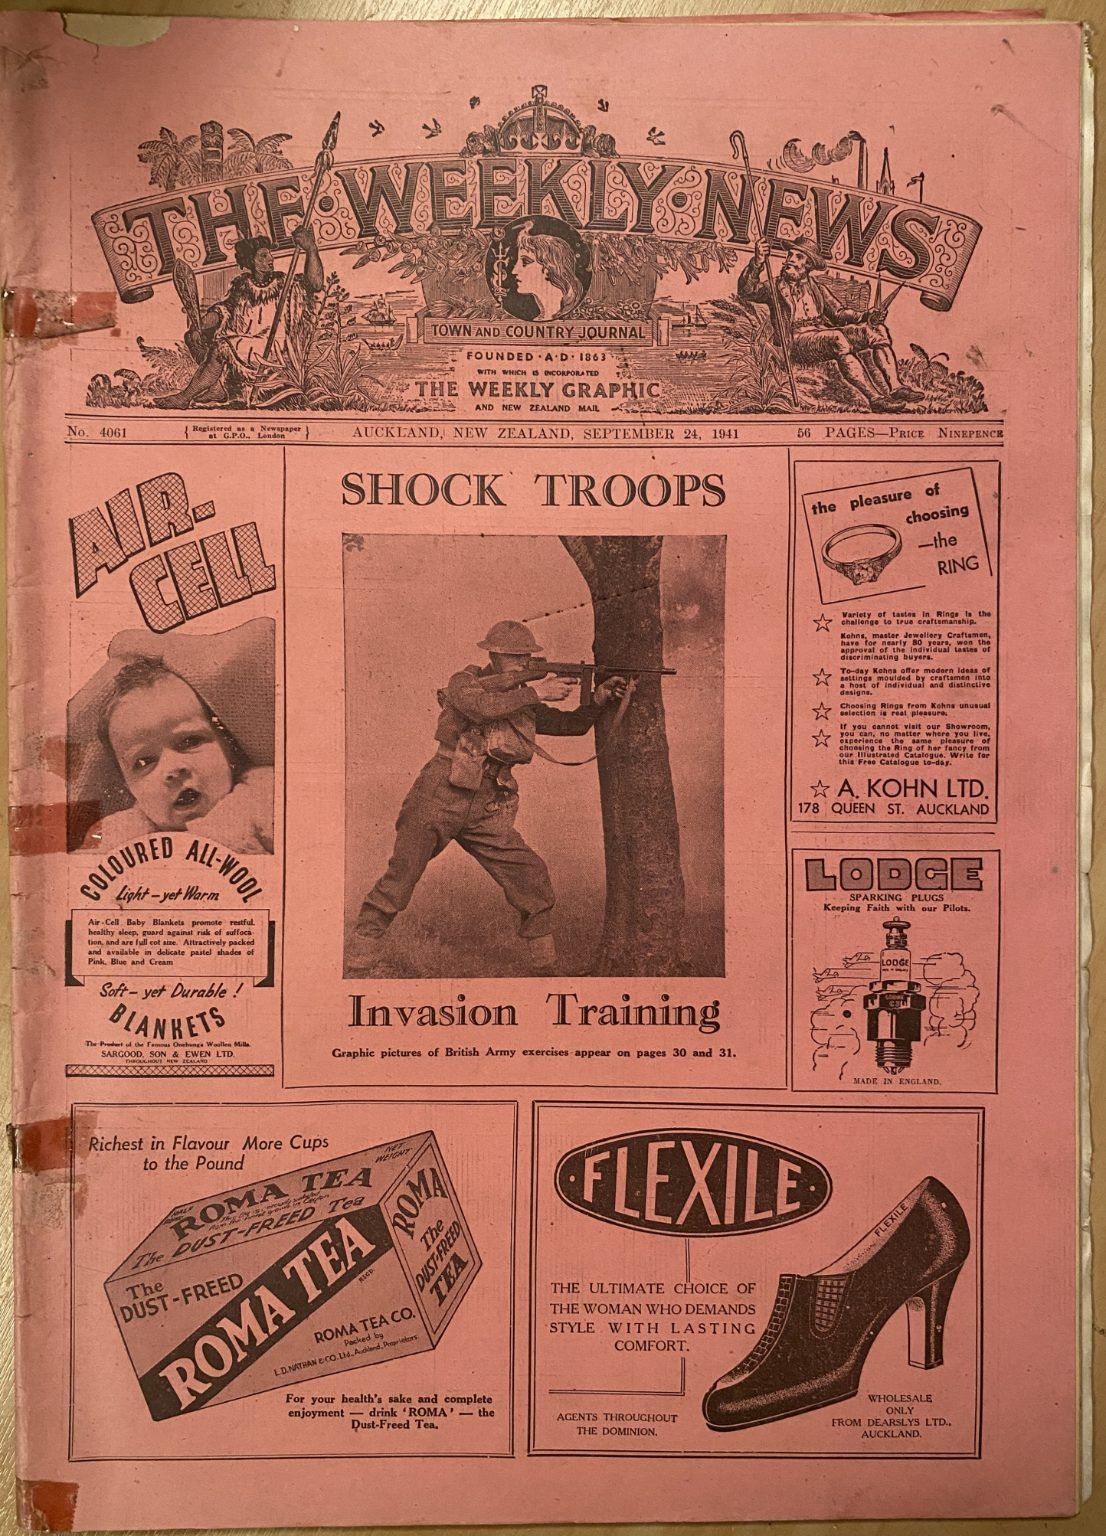 OLD NEWSPAPER: The Weekly News - No. 4061, 24 September 1941